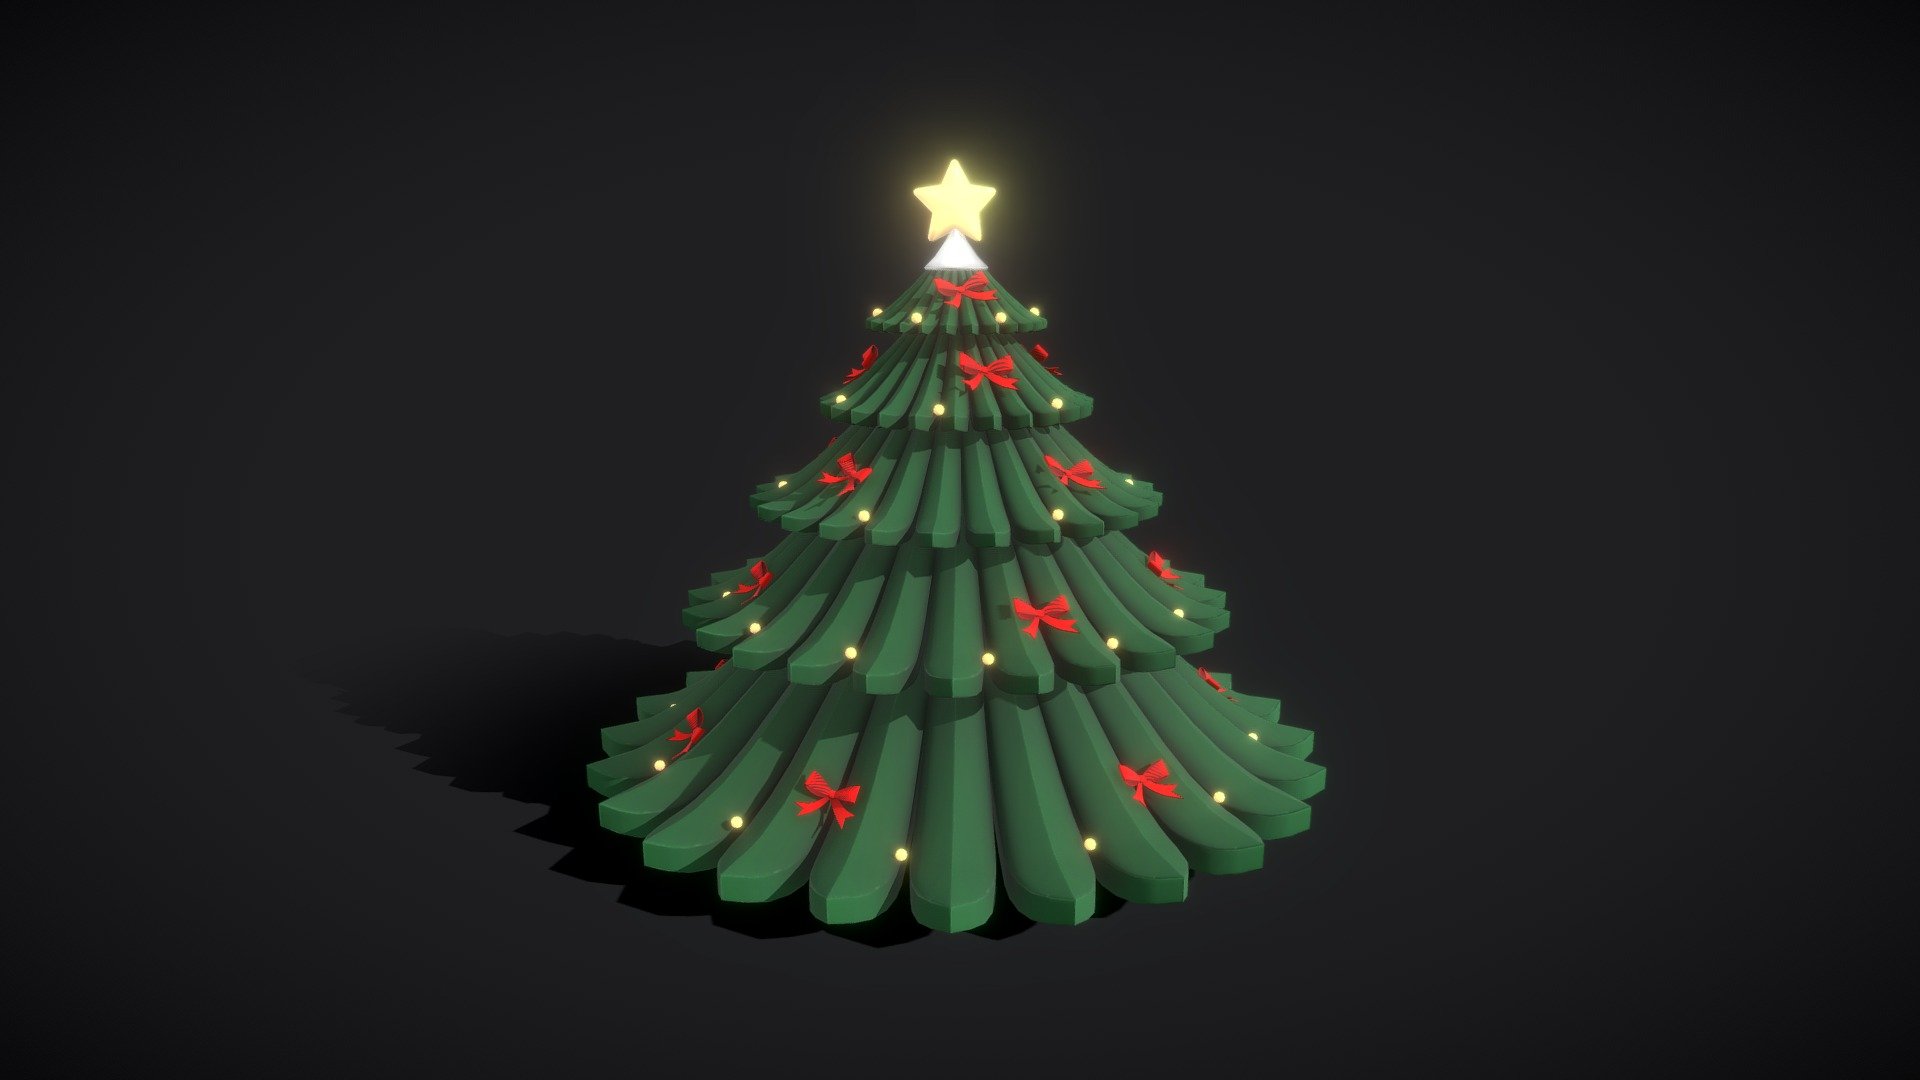 Christmas Tree game-ready model.

PBR Metal-Roughness
Overlapping UV's.

Real-World Scale.
Made in Maya, Marmoset Toolbag and Substance Painter. 
Happy Holidays!

The archive contains following files:


.MA file (original MAYA file, version 2022)
FBX file
OBJ 

Texture set (available in 20482048 and 40964096)


Tree_BaseColor
Tree_Normal
Tree_Metalness
Tree_Emission
Tree_Roughness
Tree_AO

If you have any additional questions or any problems related to the model, kindly contact me: katy.b2802@gmail.com - Stylized Christmas Tree - Buy Royalty Free 3D model by Enkarra 3d model